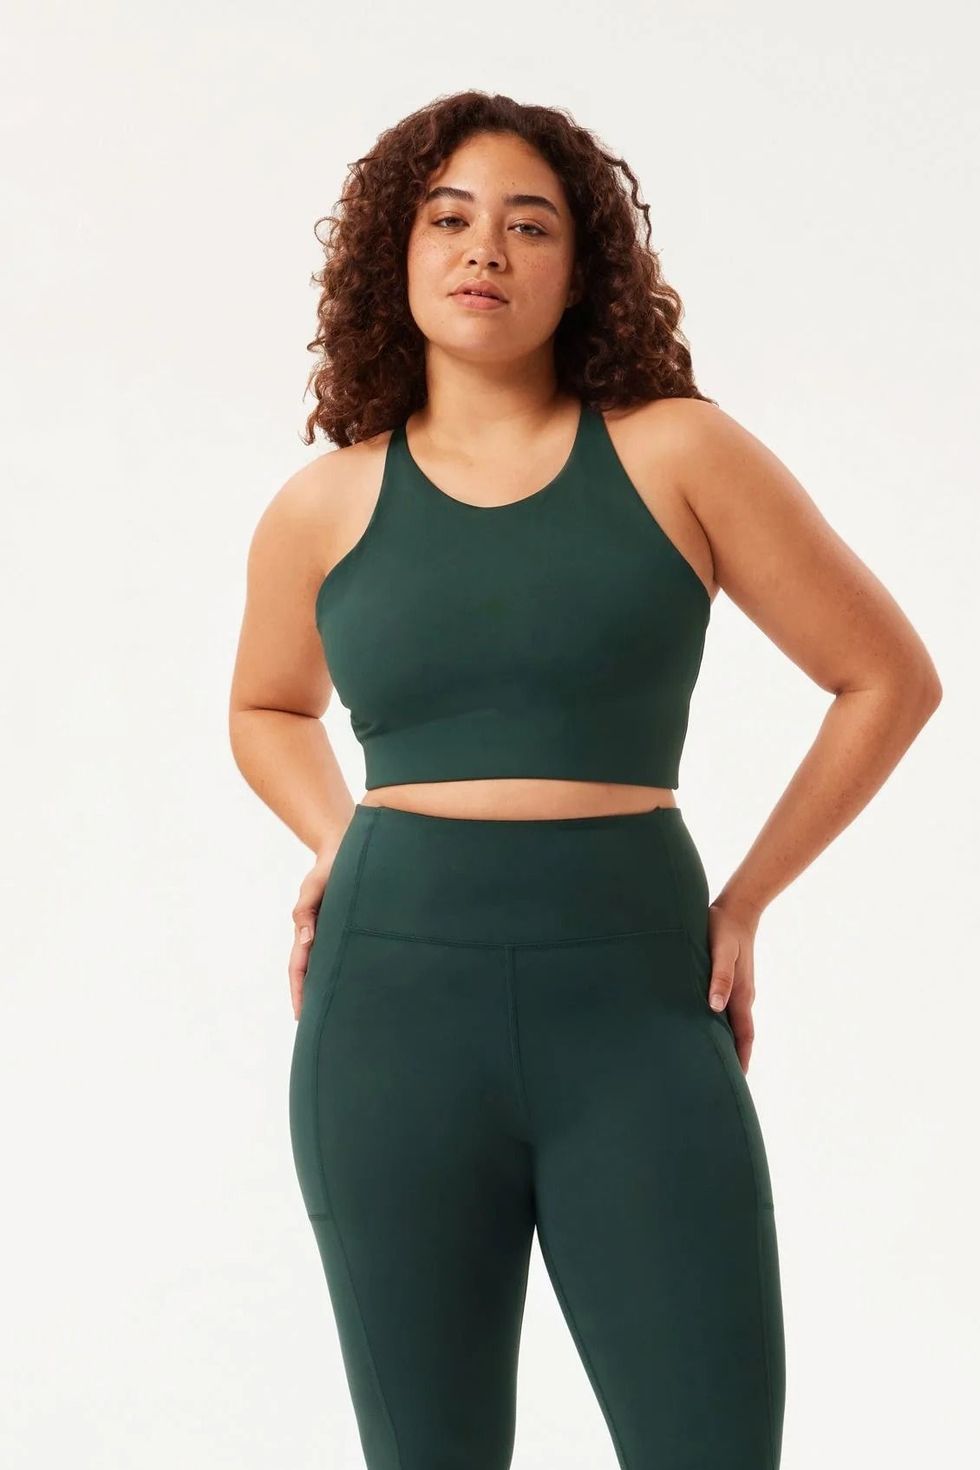  PERSIT Yoga Pants for Women with Pockets High Waisted